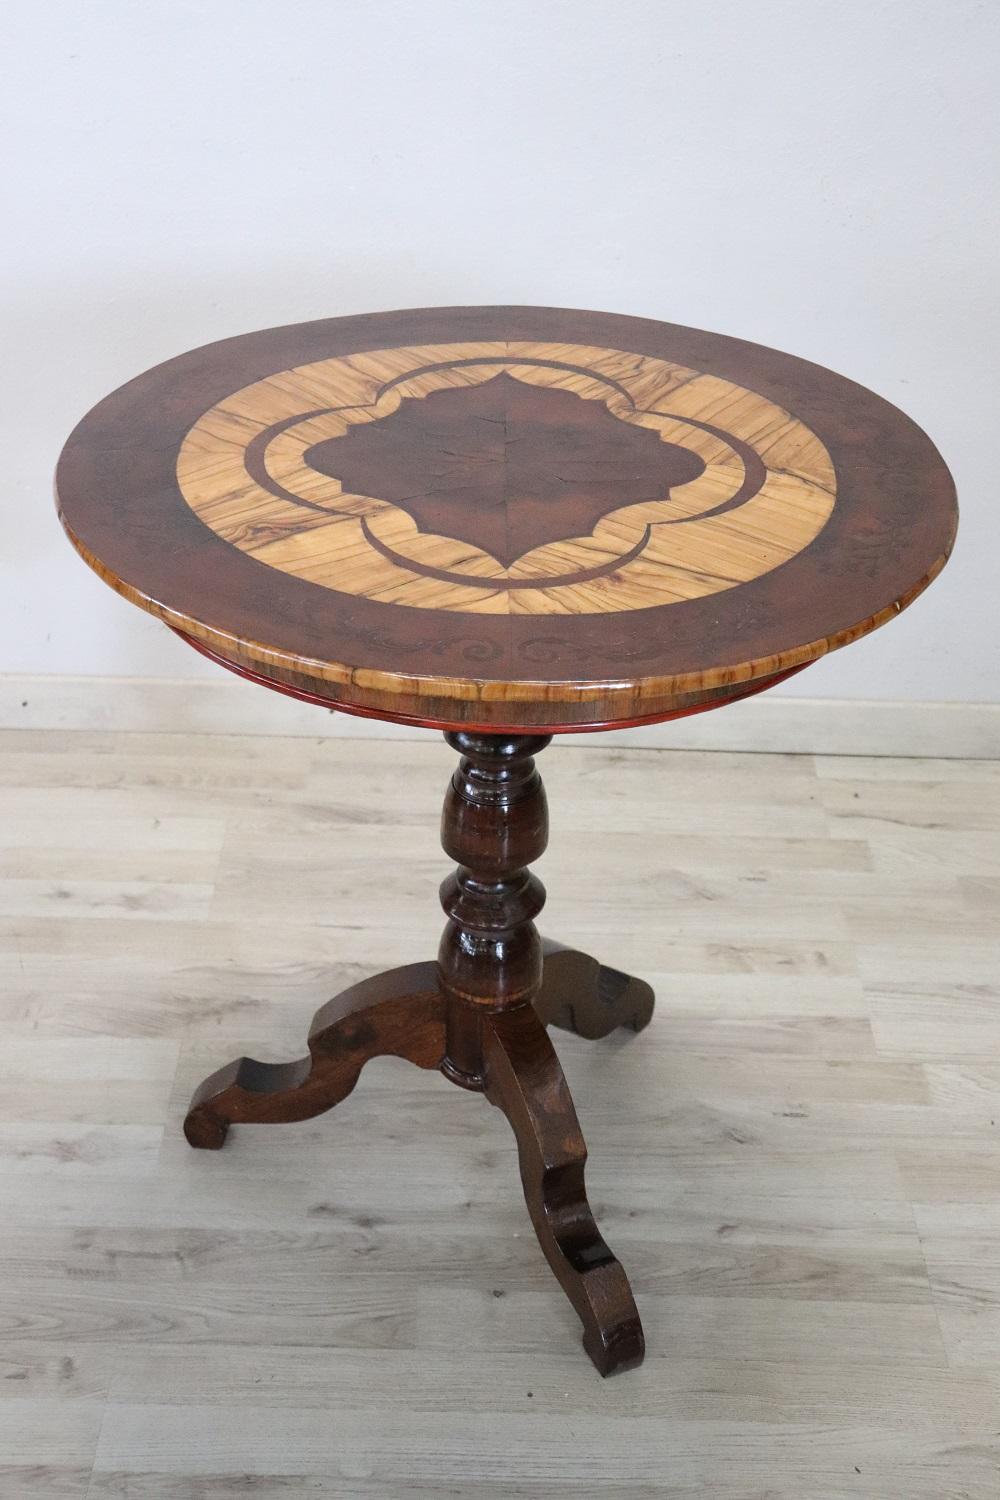 Italian 19th Century Inlaid Walnut Round Gueridon Table or Pedestal Table For Sale